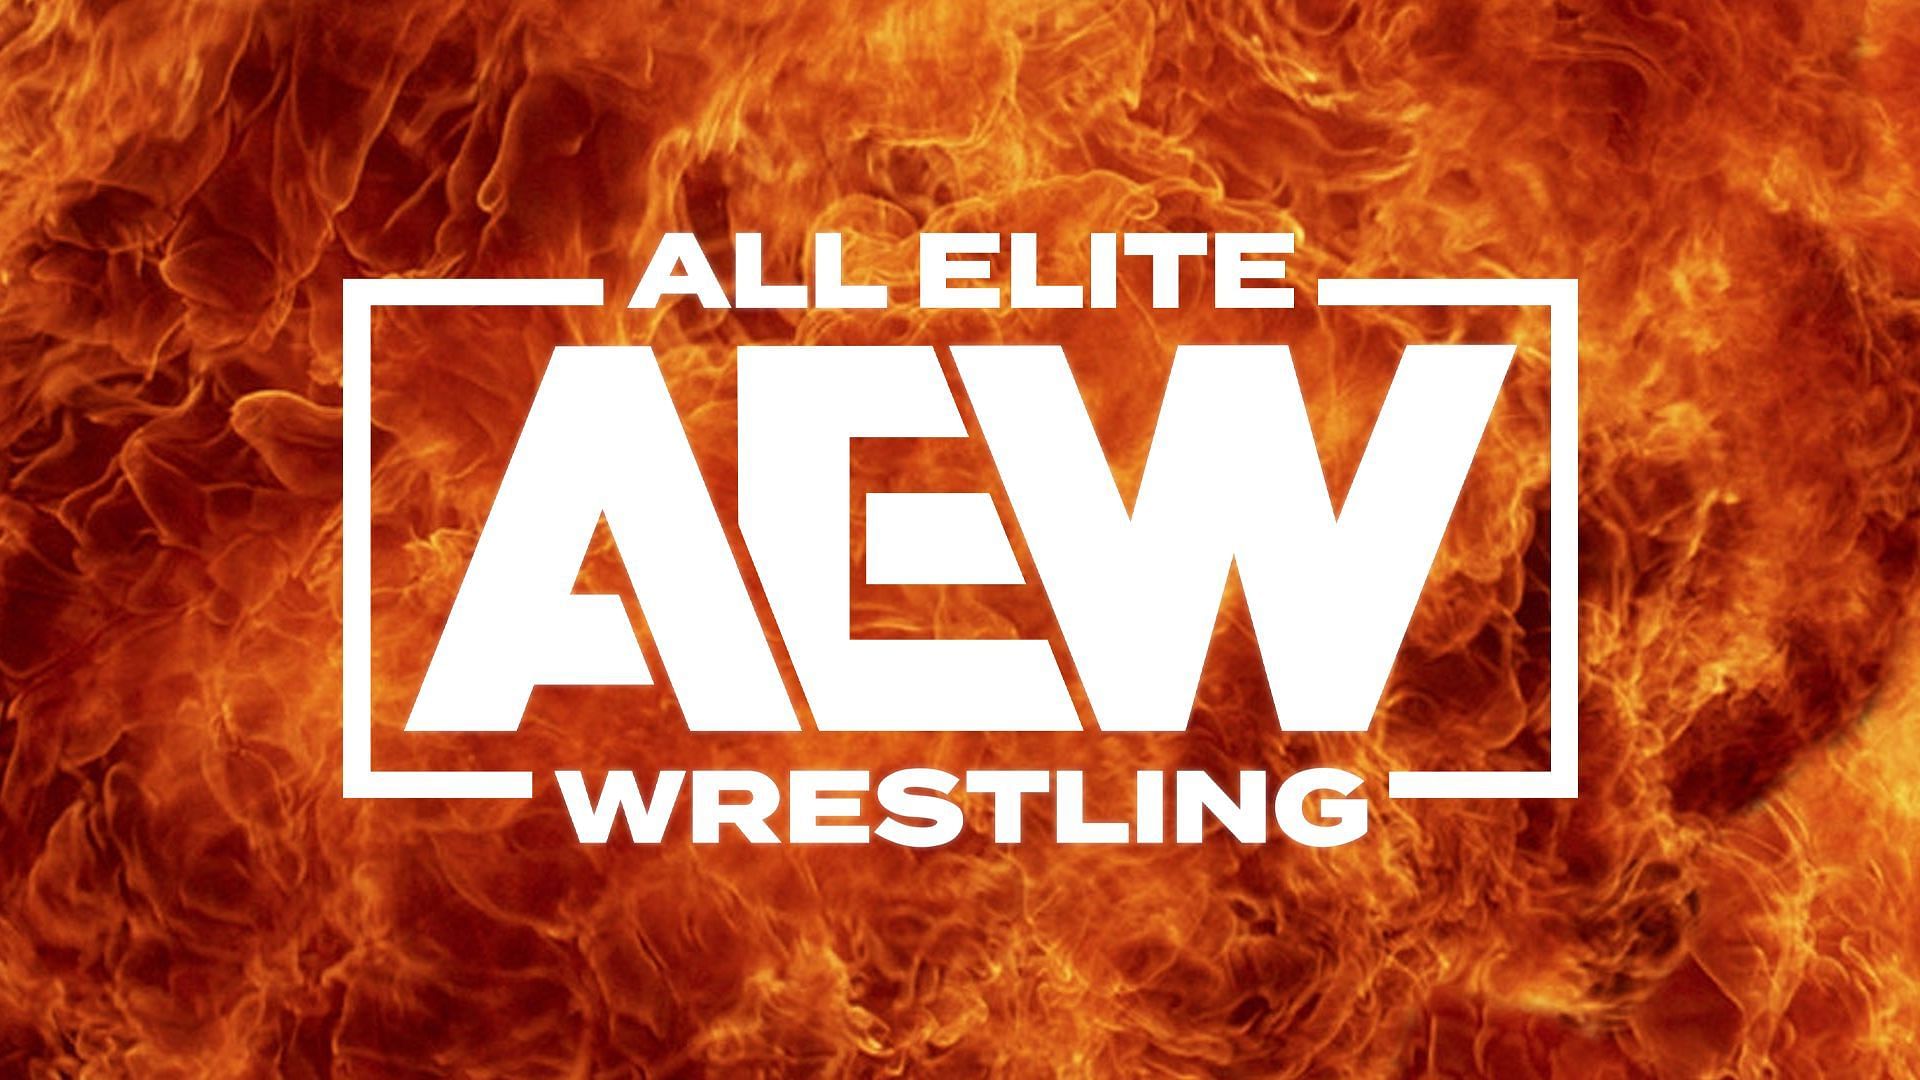 A top champion is looking for more TV time in AEW